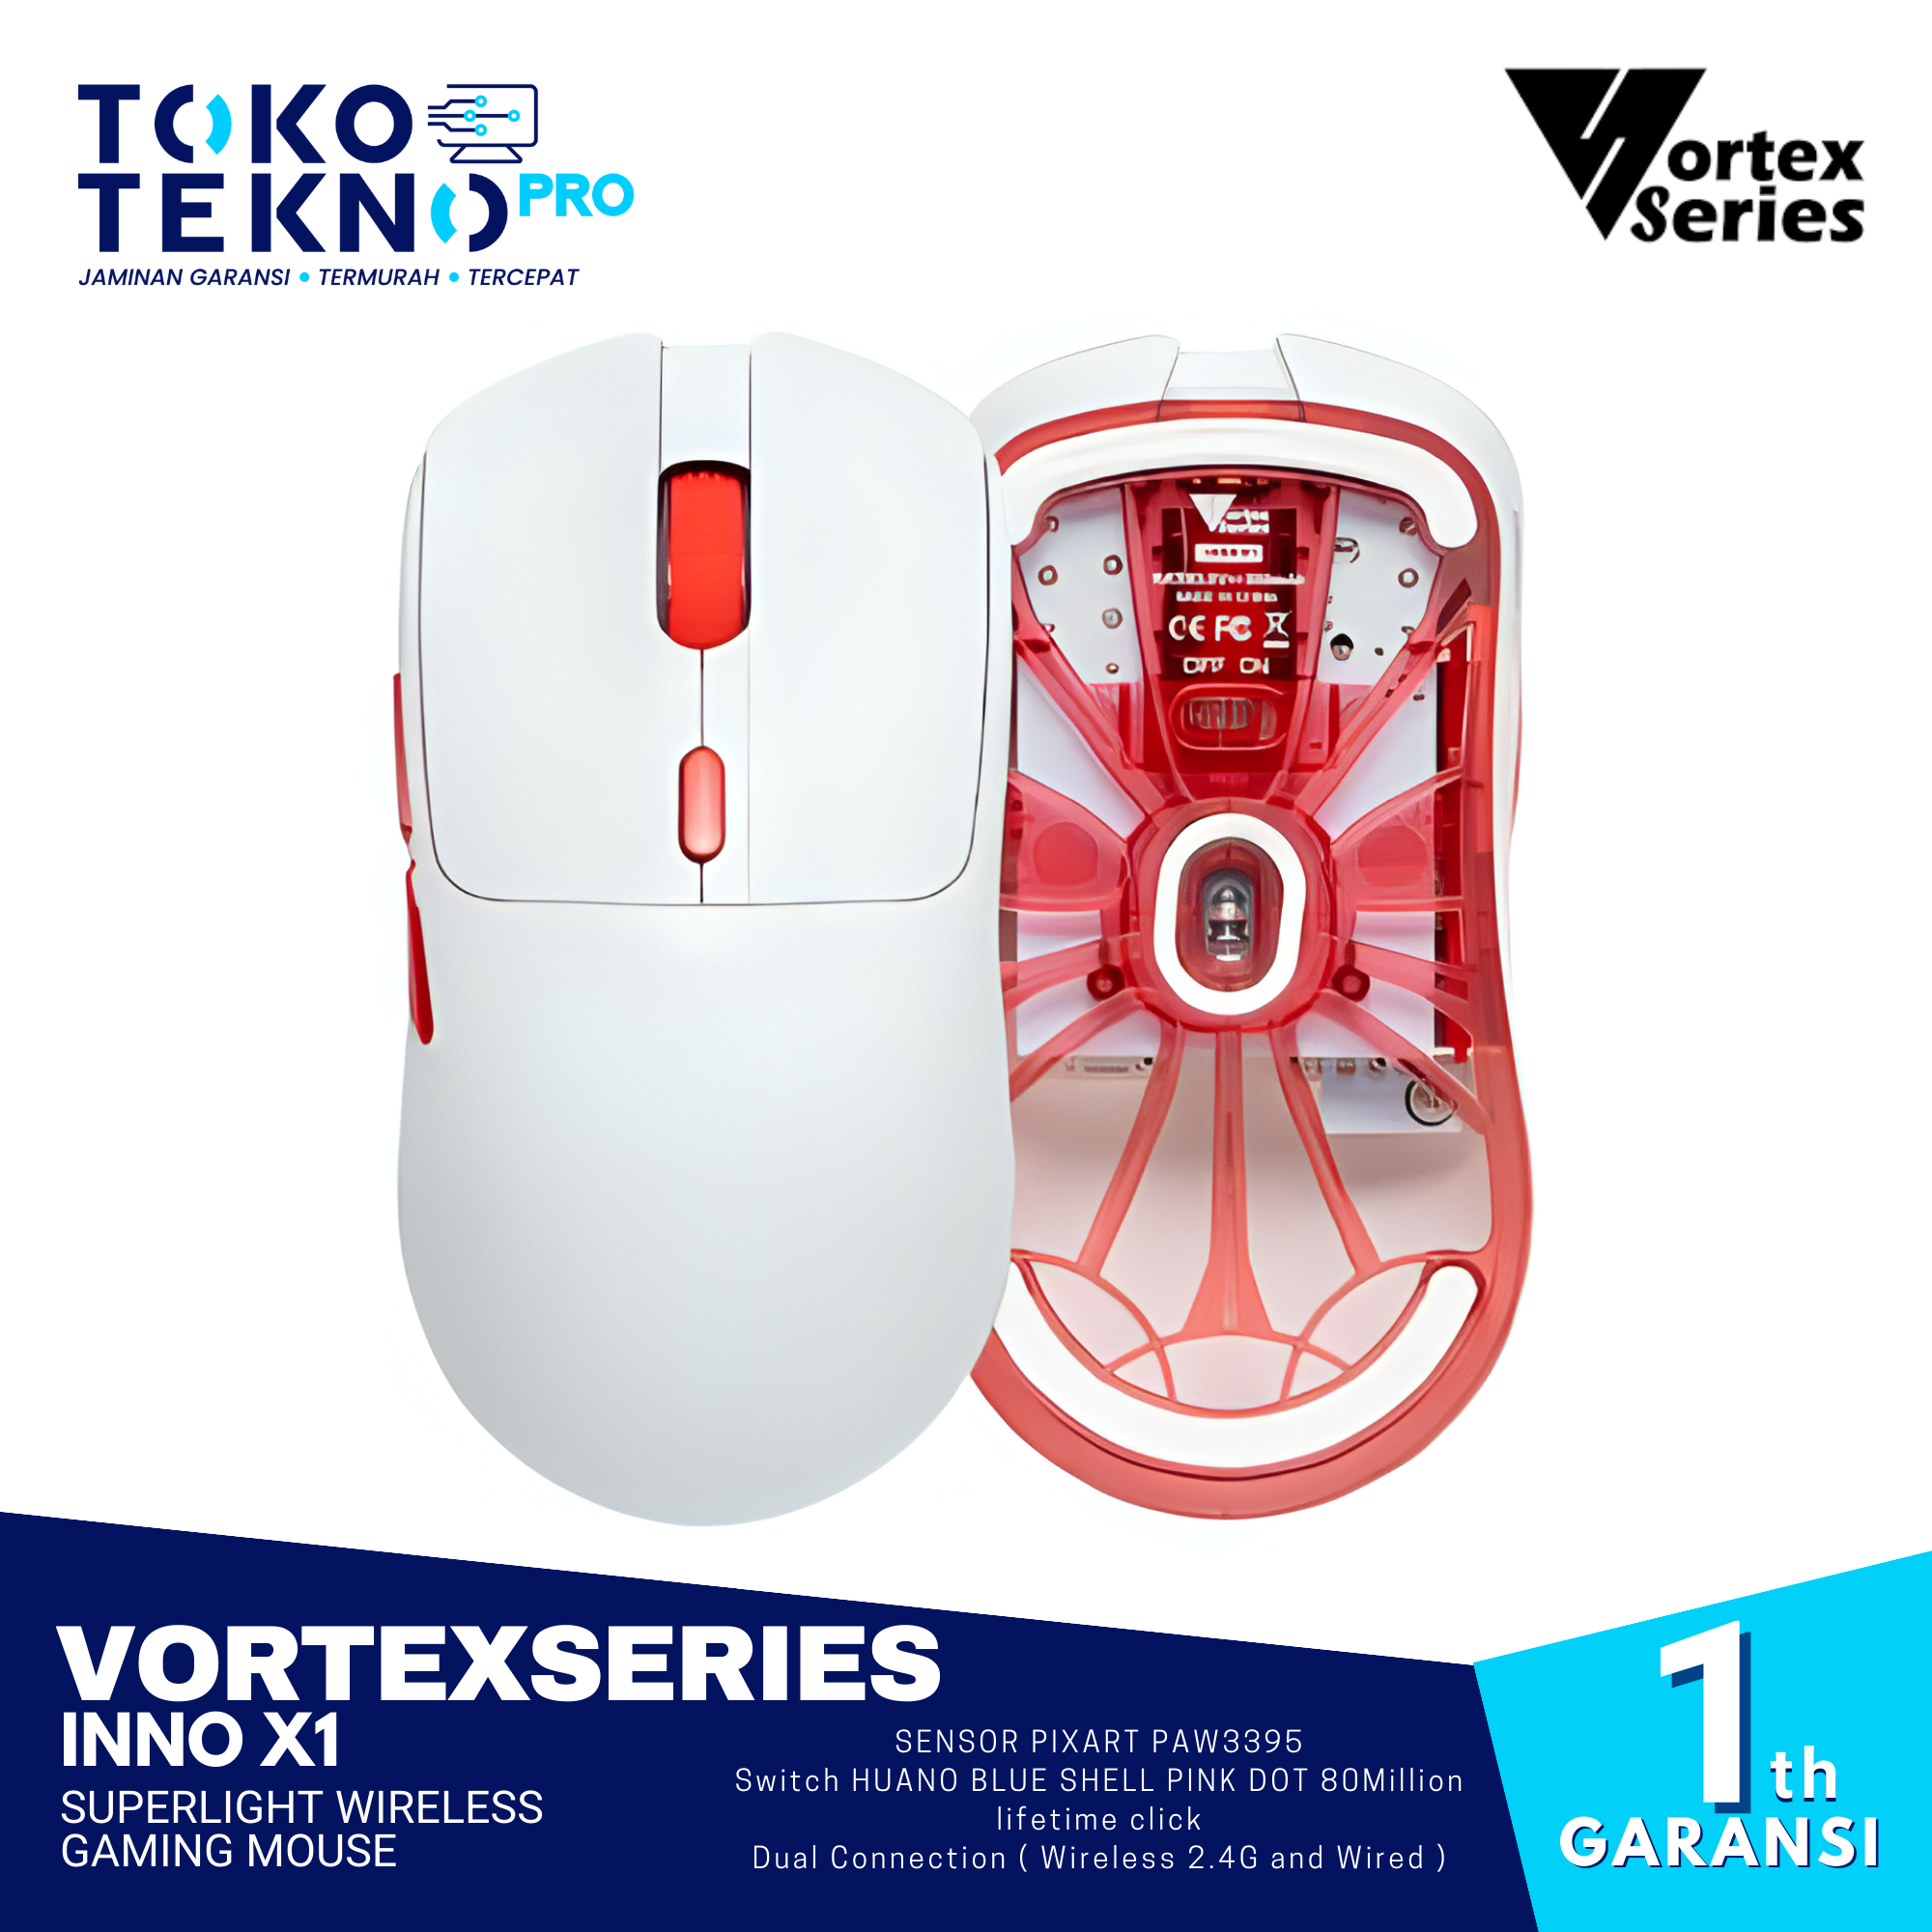 VortexSeries INNO X1 Superlight Wireless Gaming Mouse